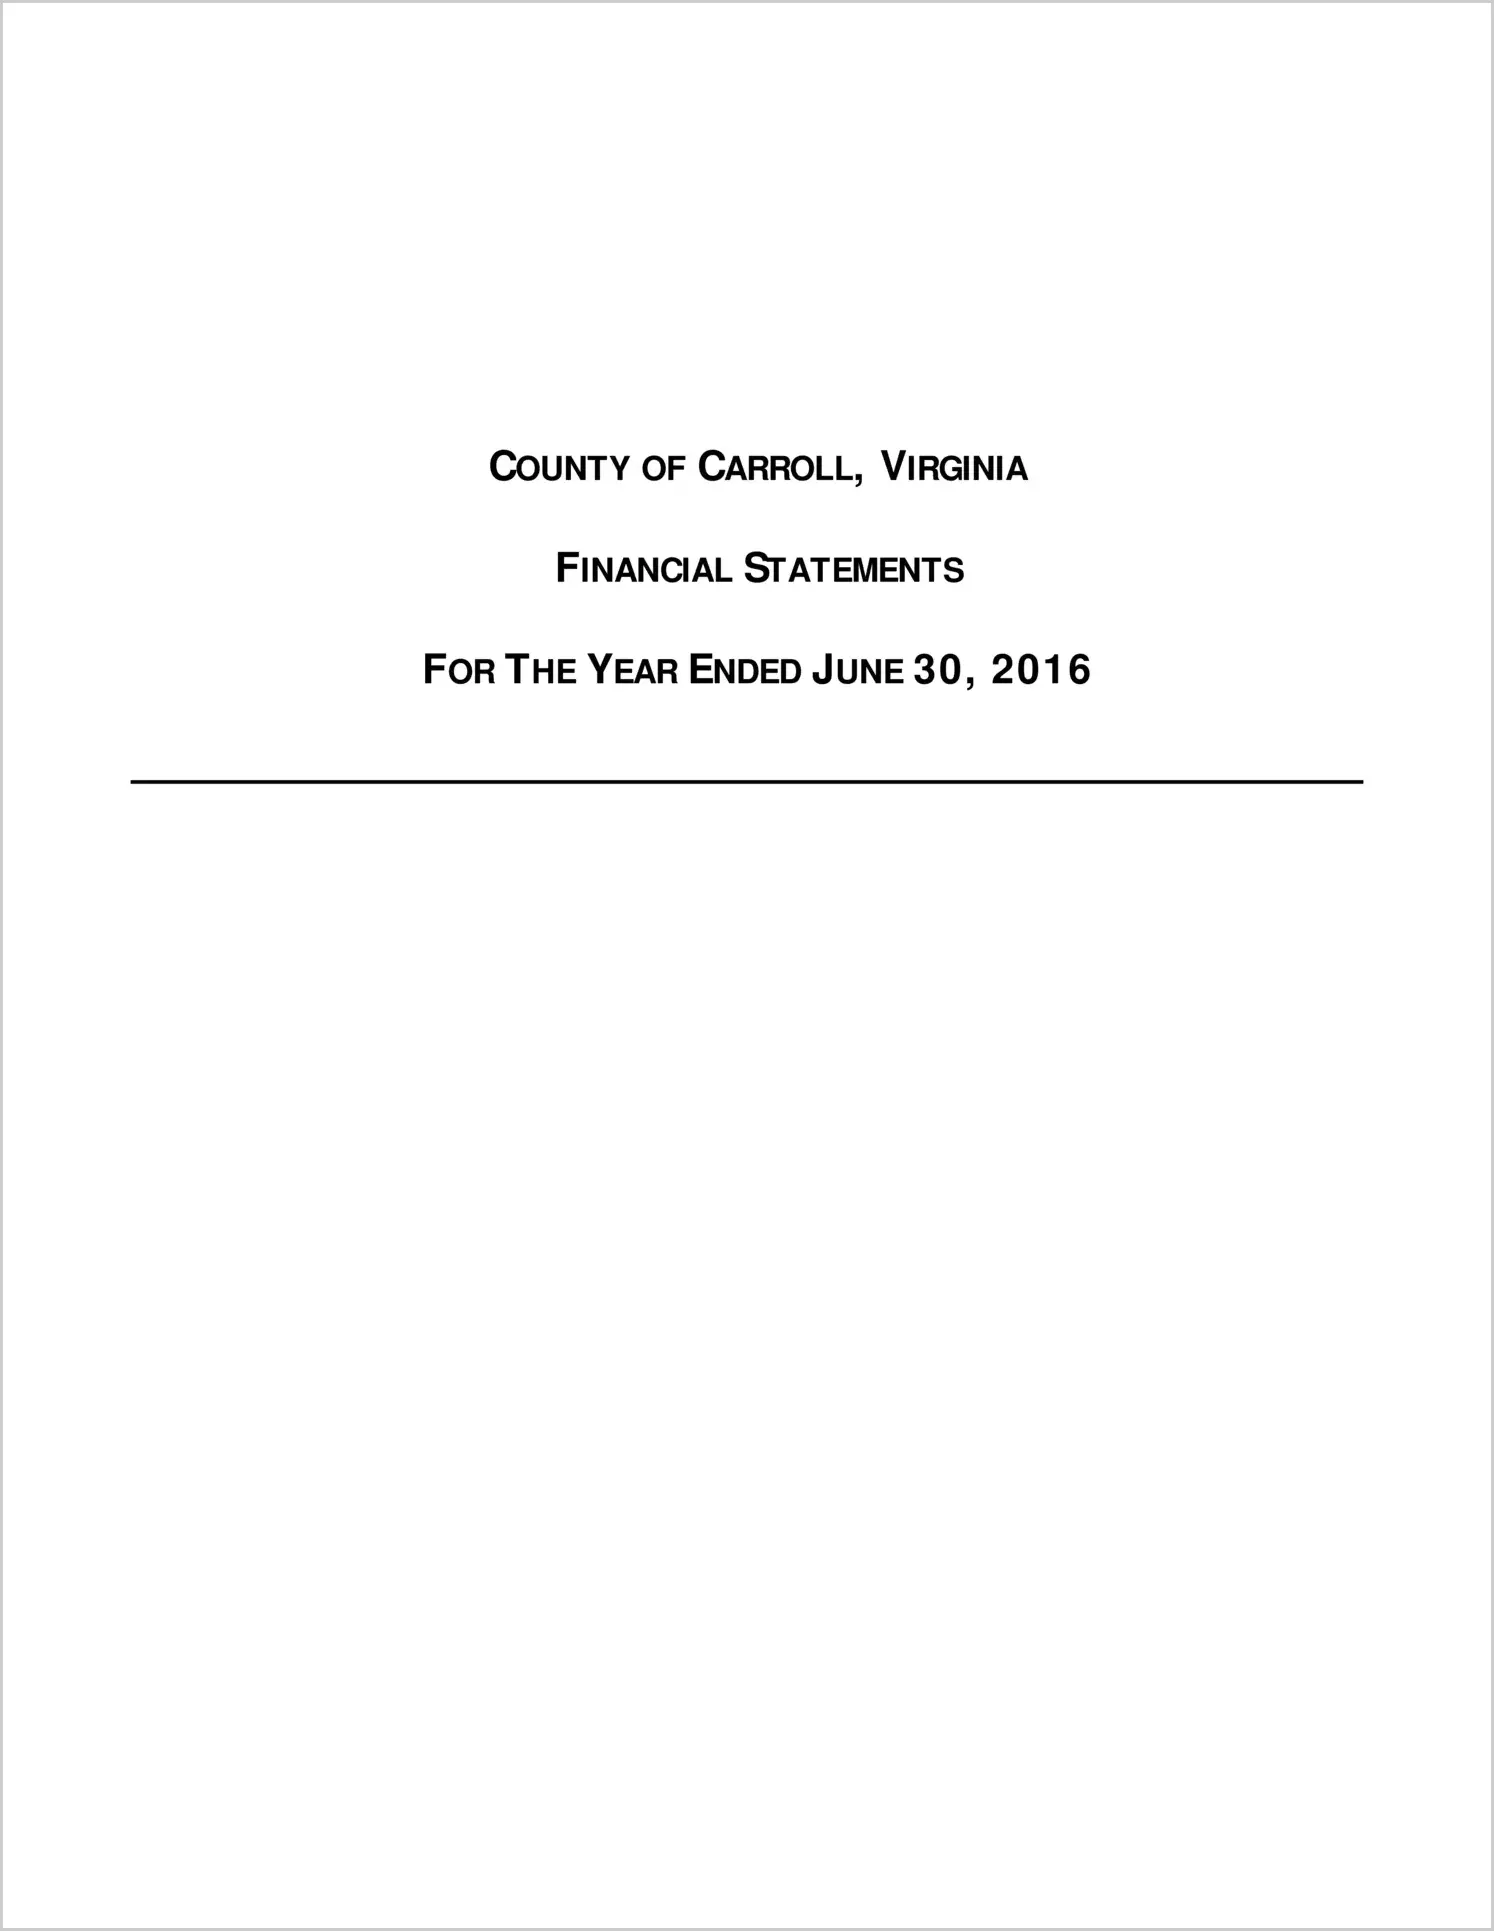 2016 Annual Financial Report for County of Carroll